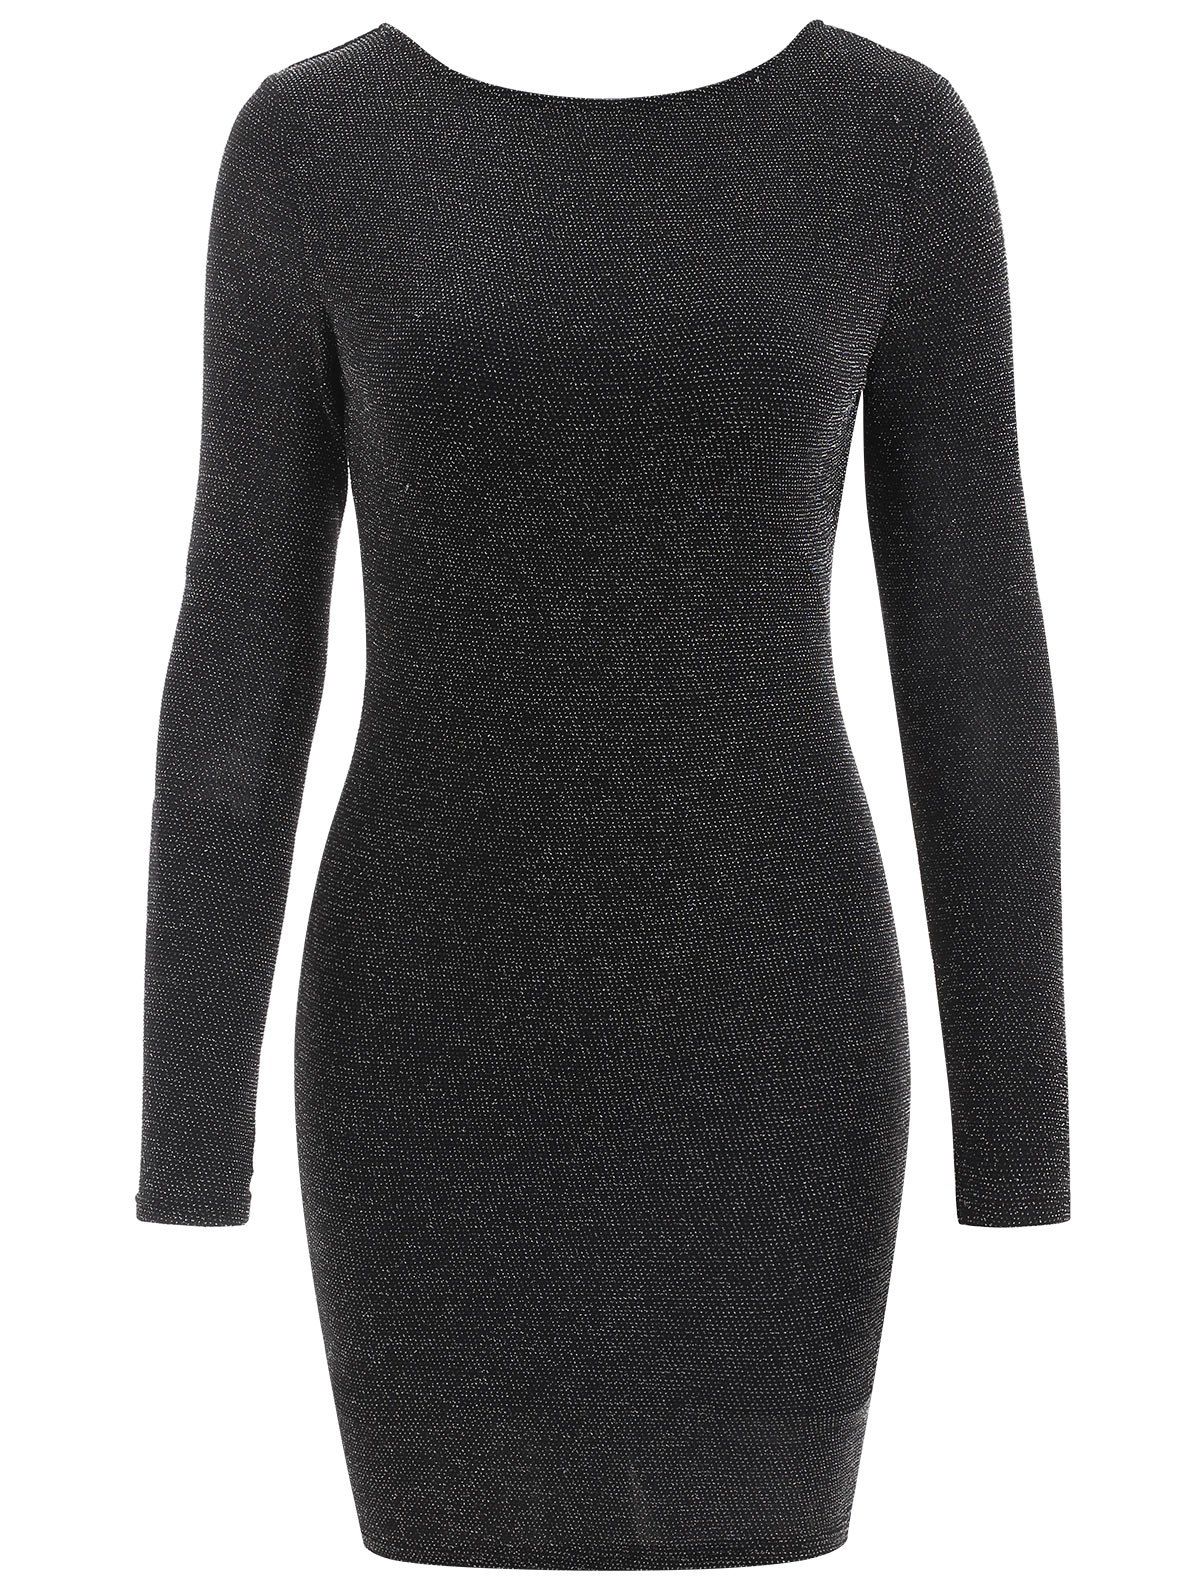 Online Long Sleeve Sparkly Bodycon Dress  